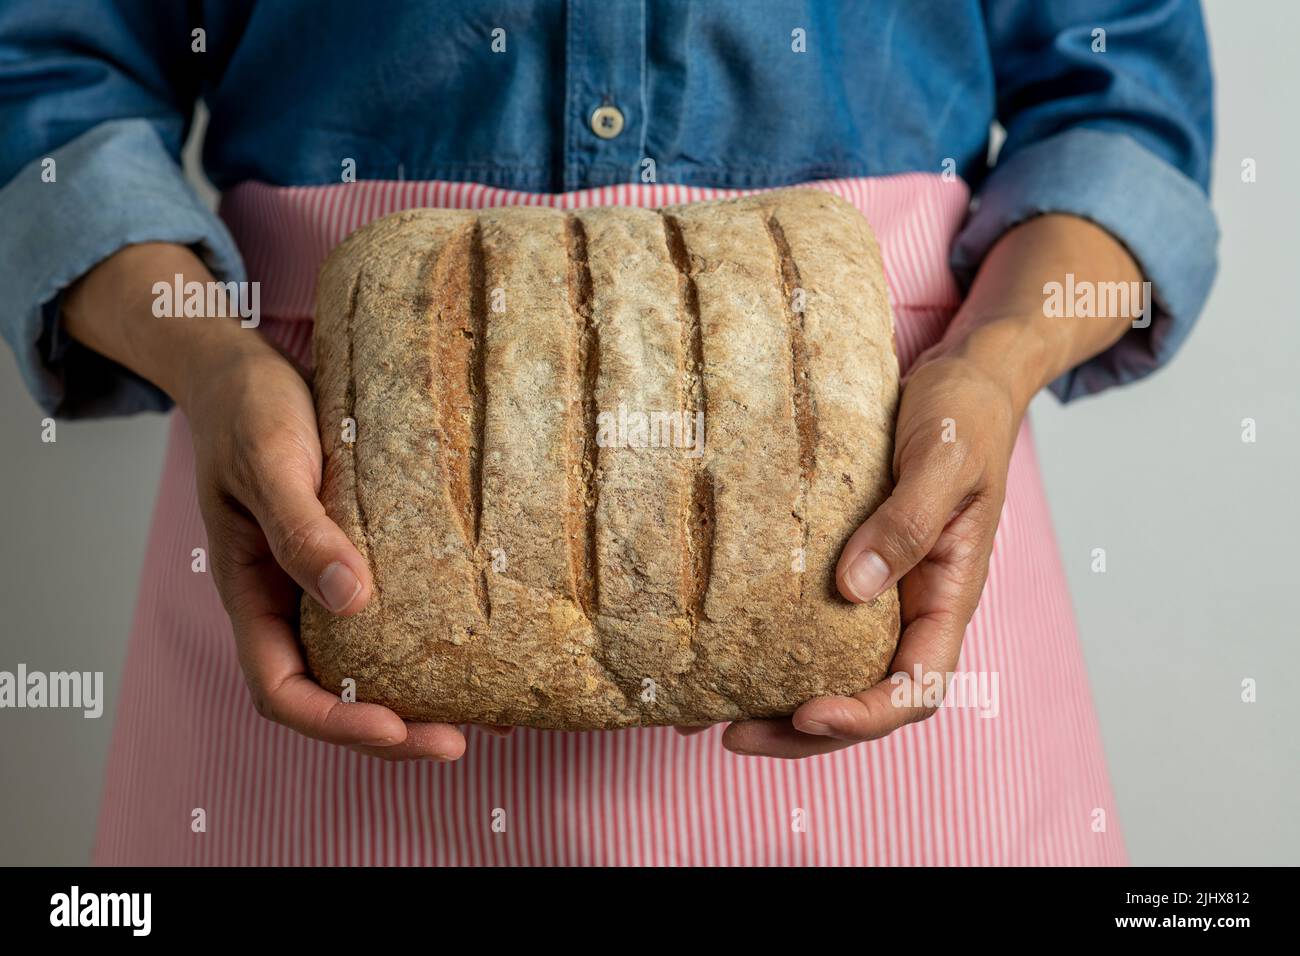 Young woman holding freshly homemade rustic bread - stock photo Stock Photo